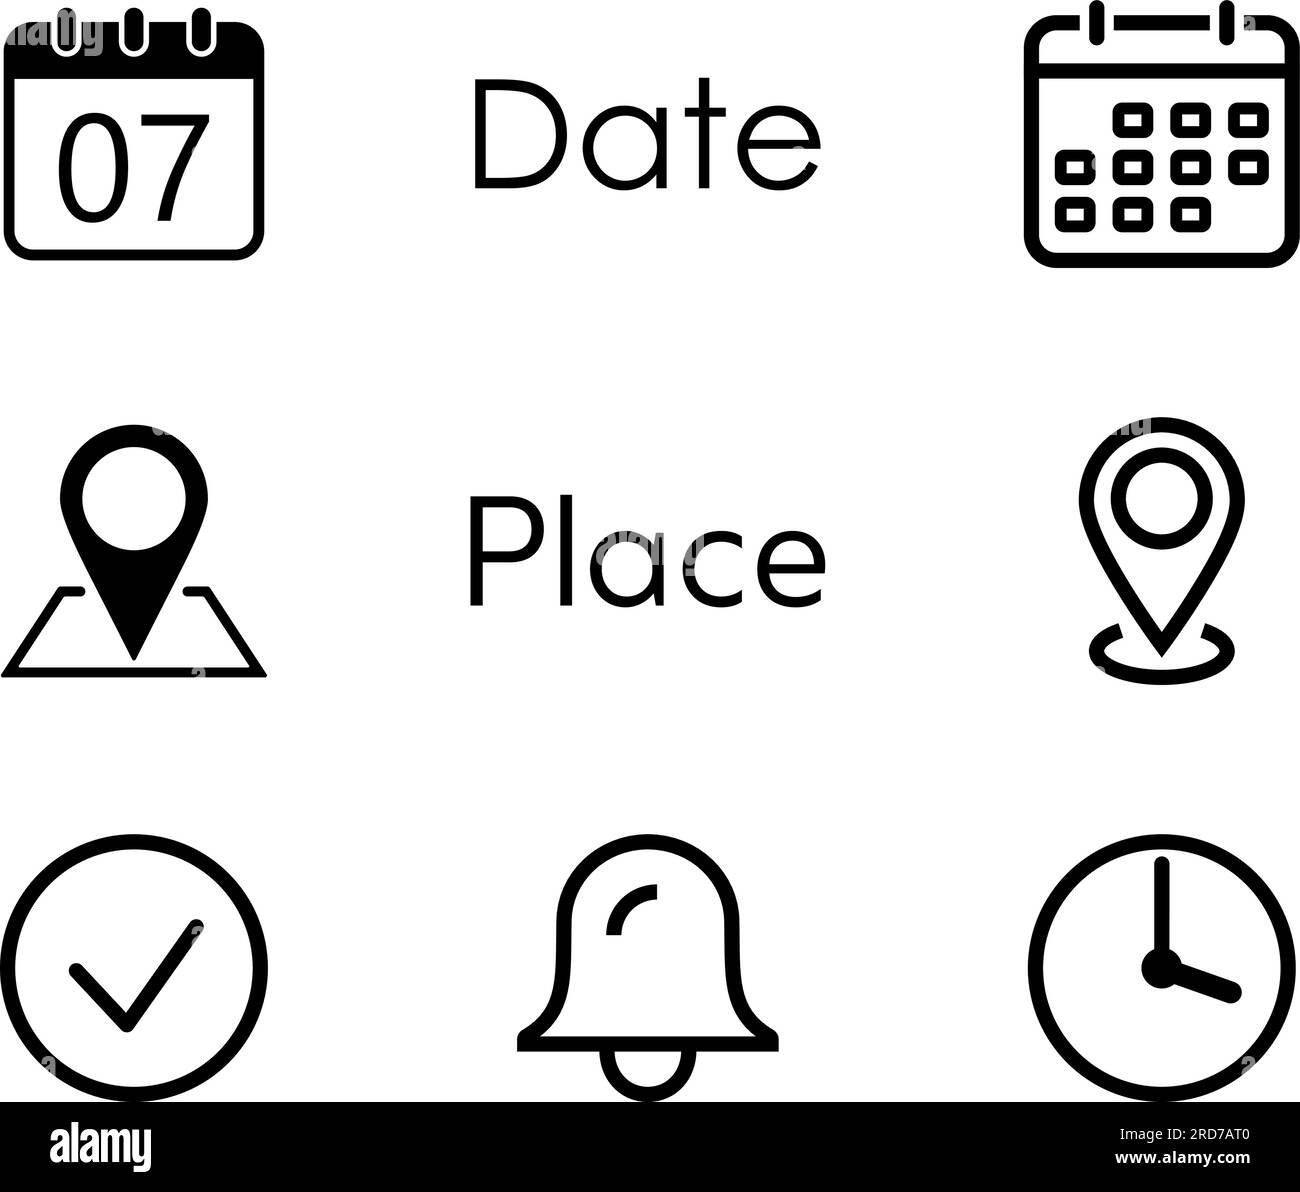 Business icons in the form of date, place, check, bell ank time Stock Vector